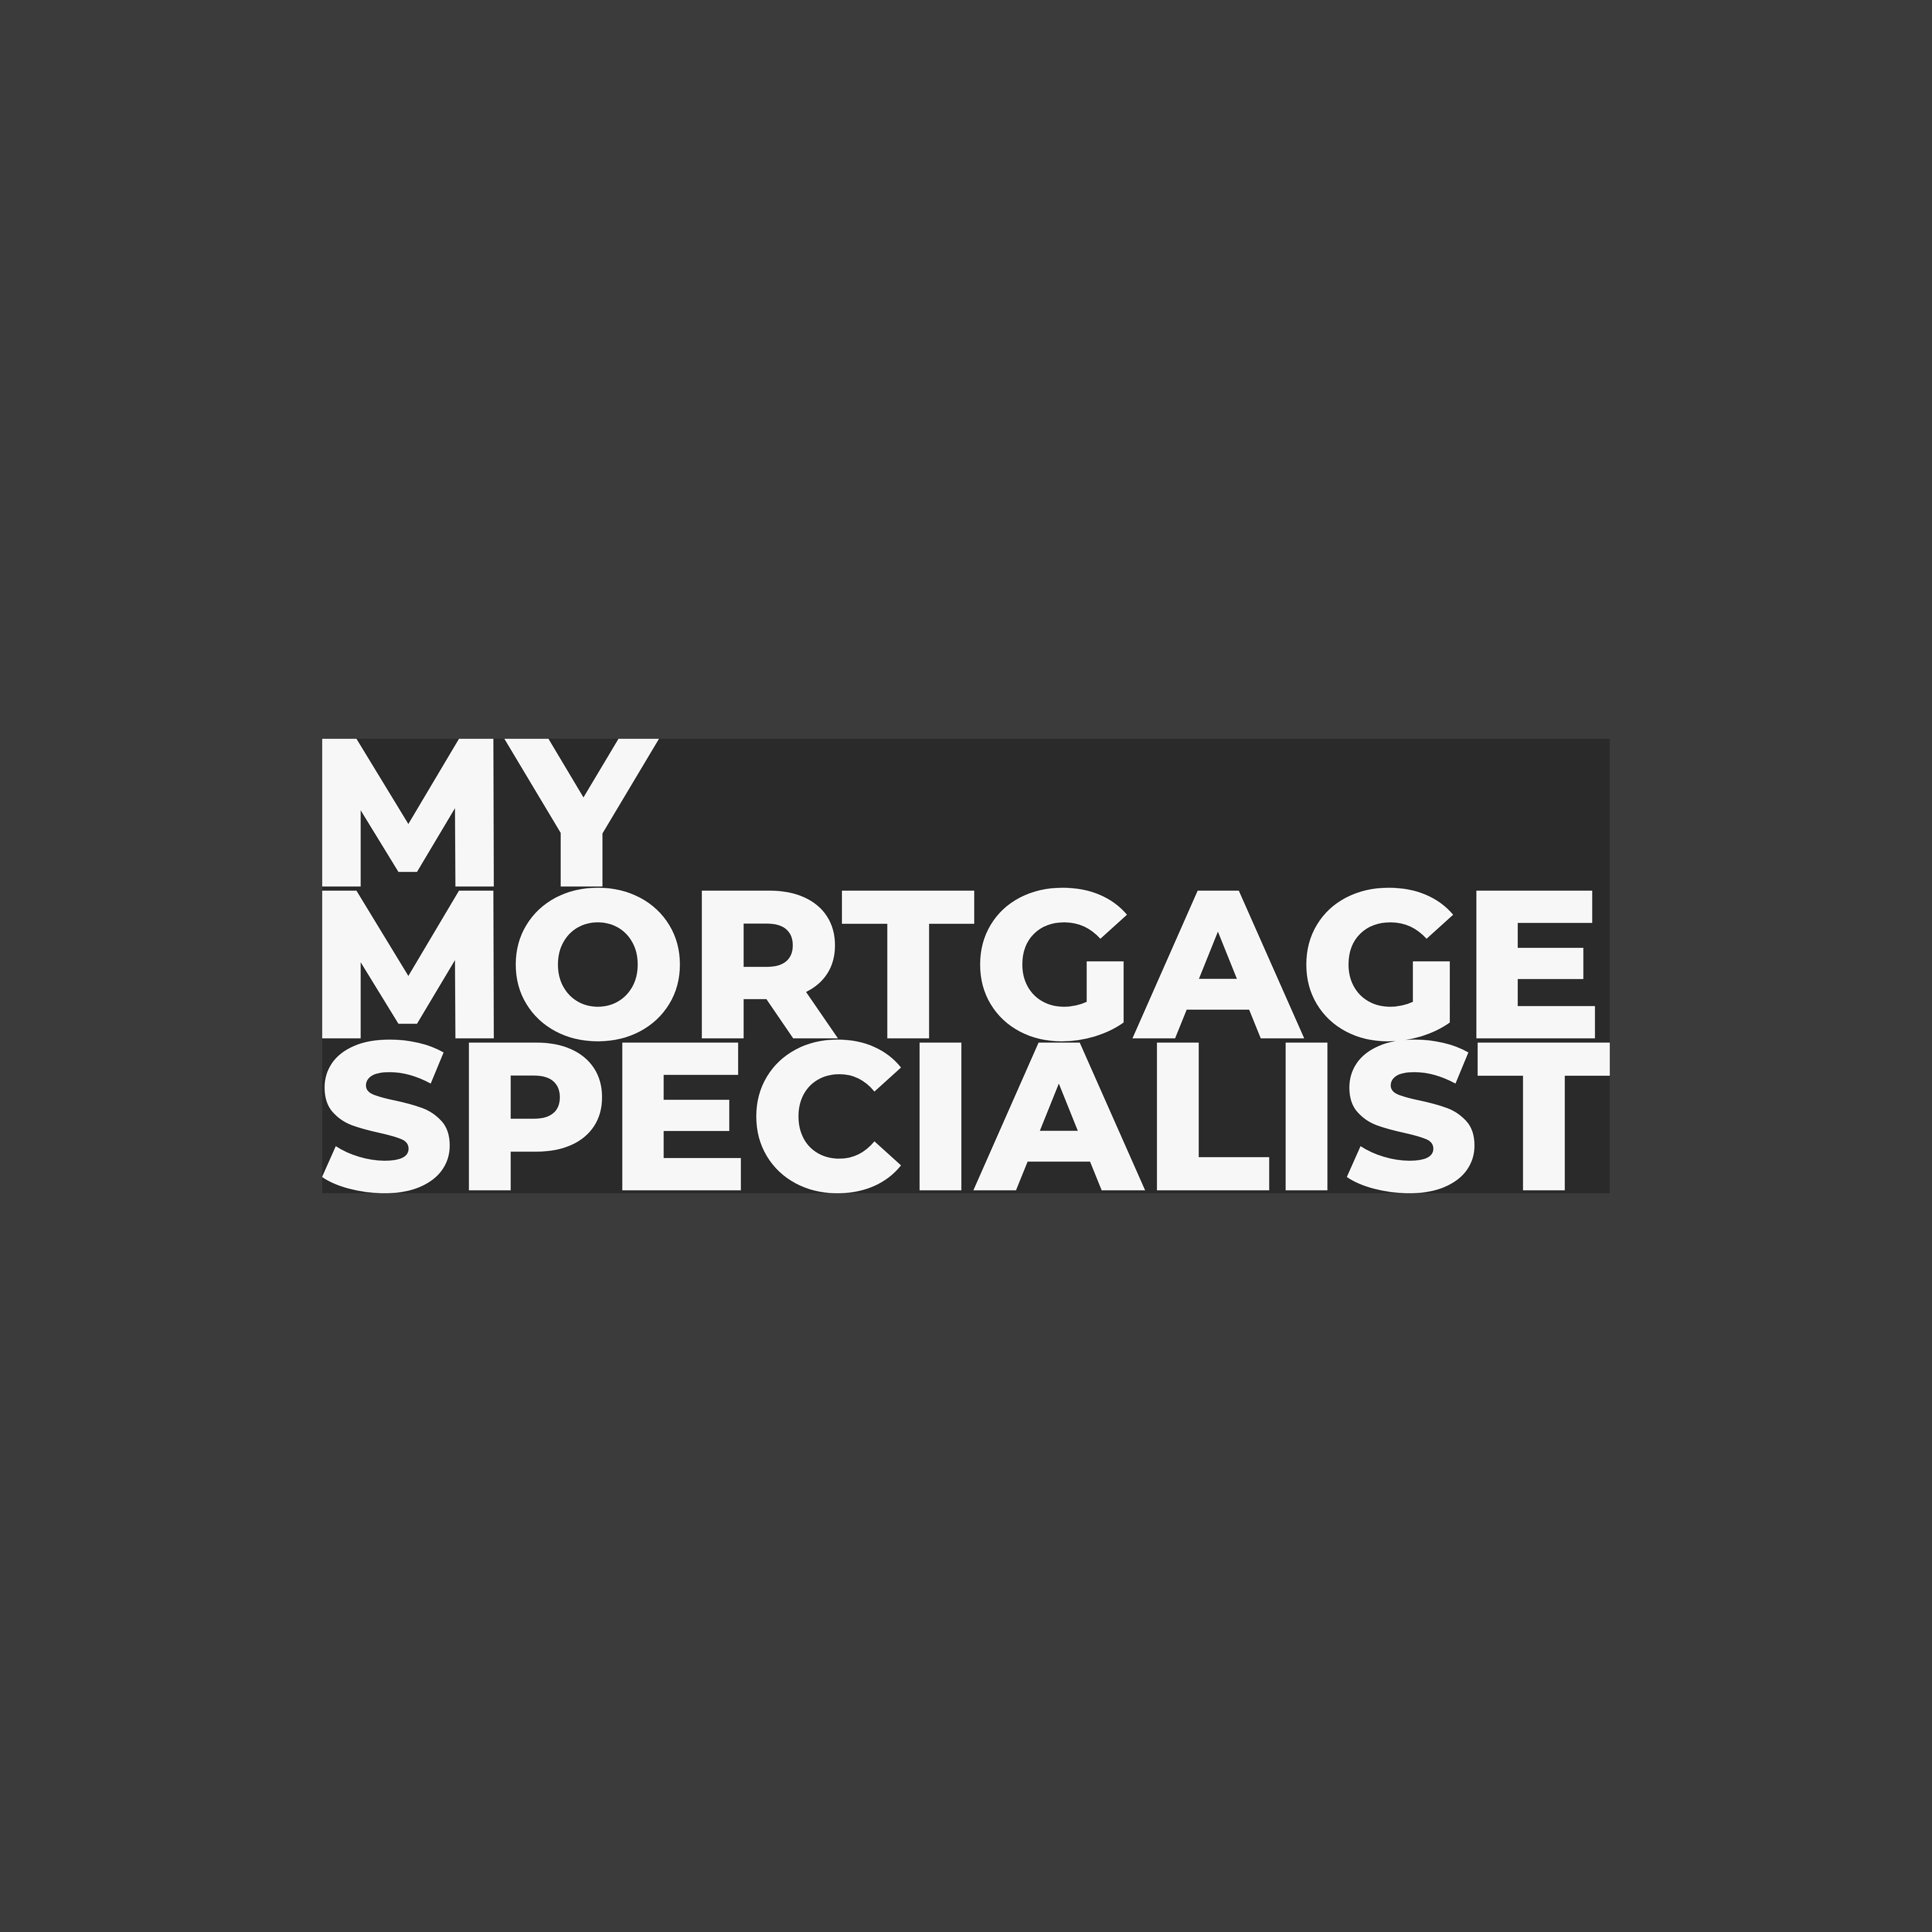 My Mortgage Specialist